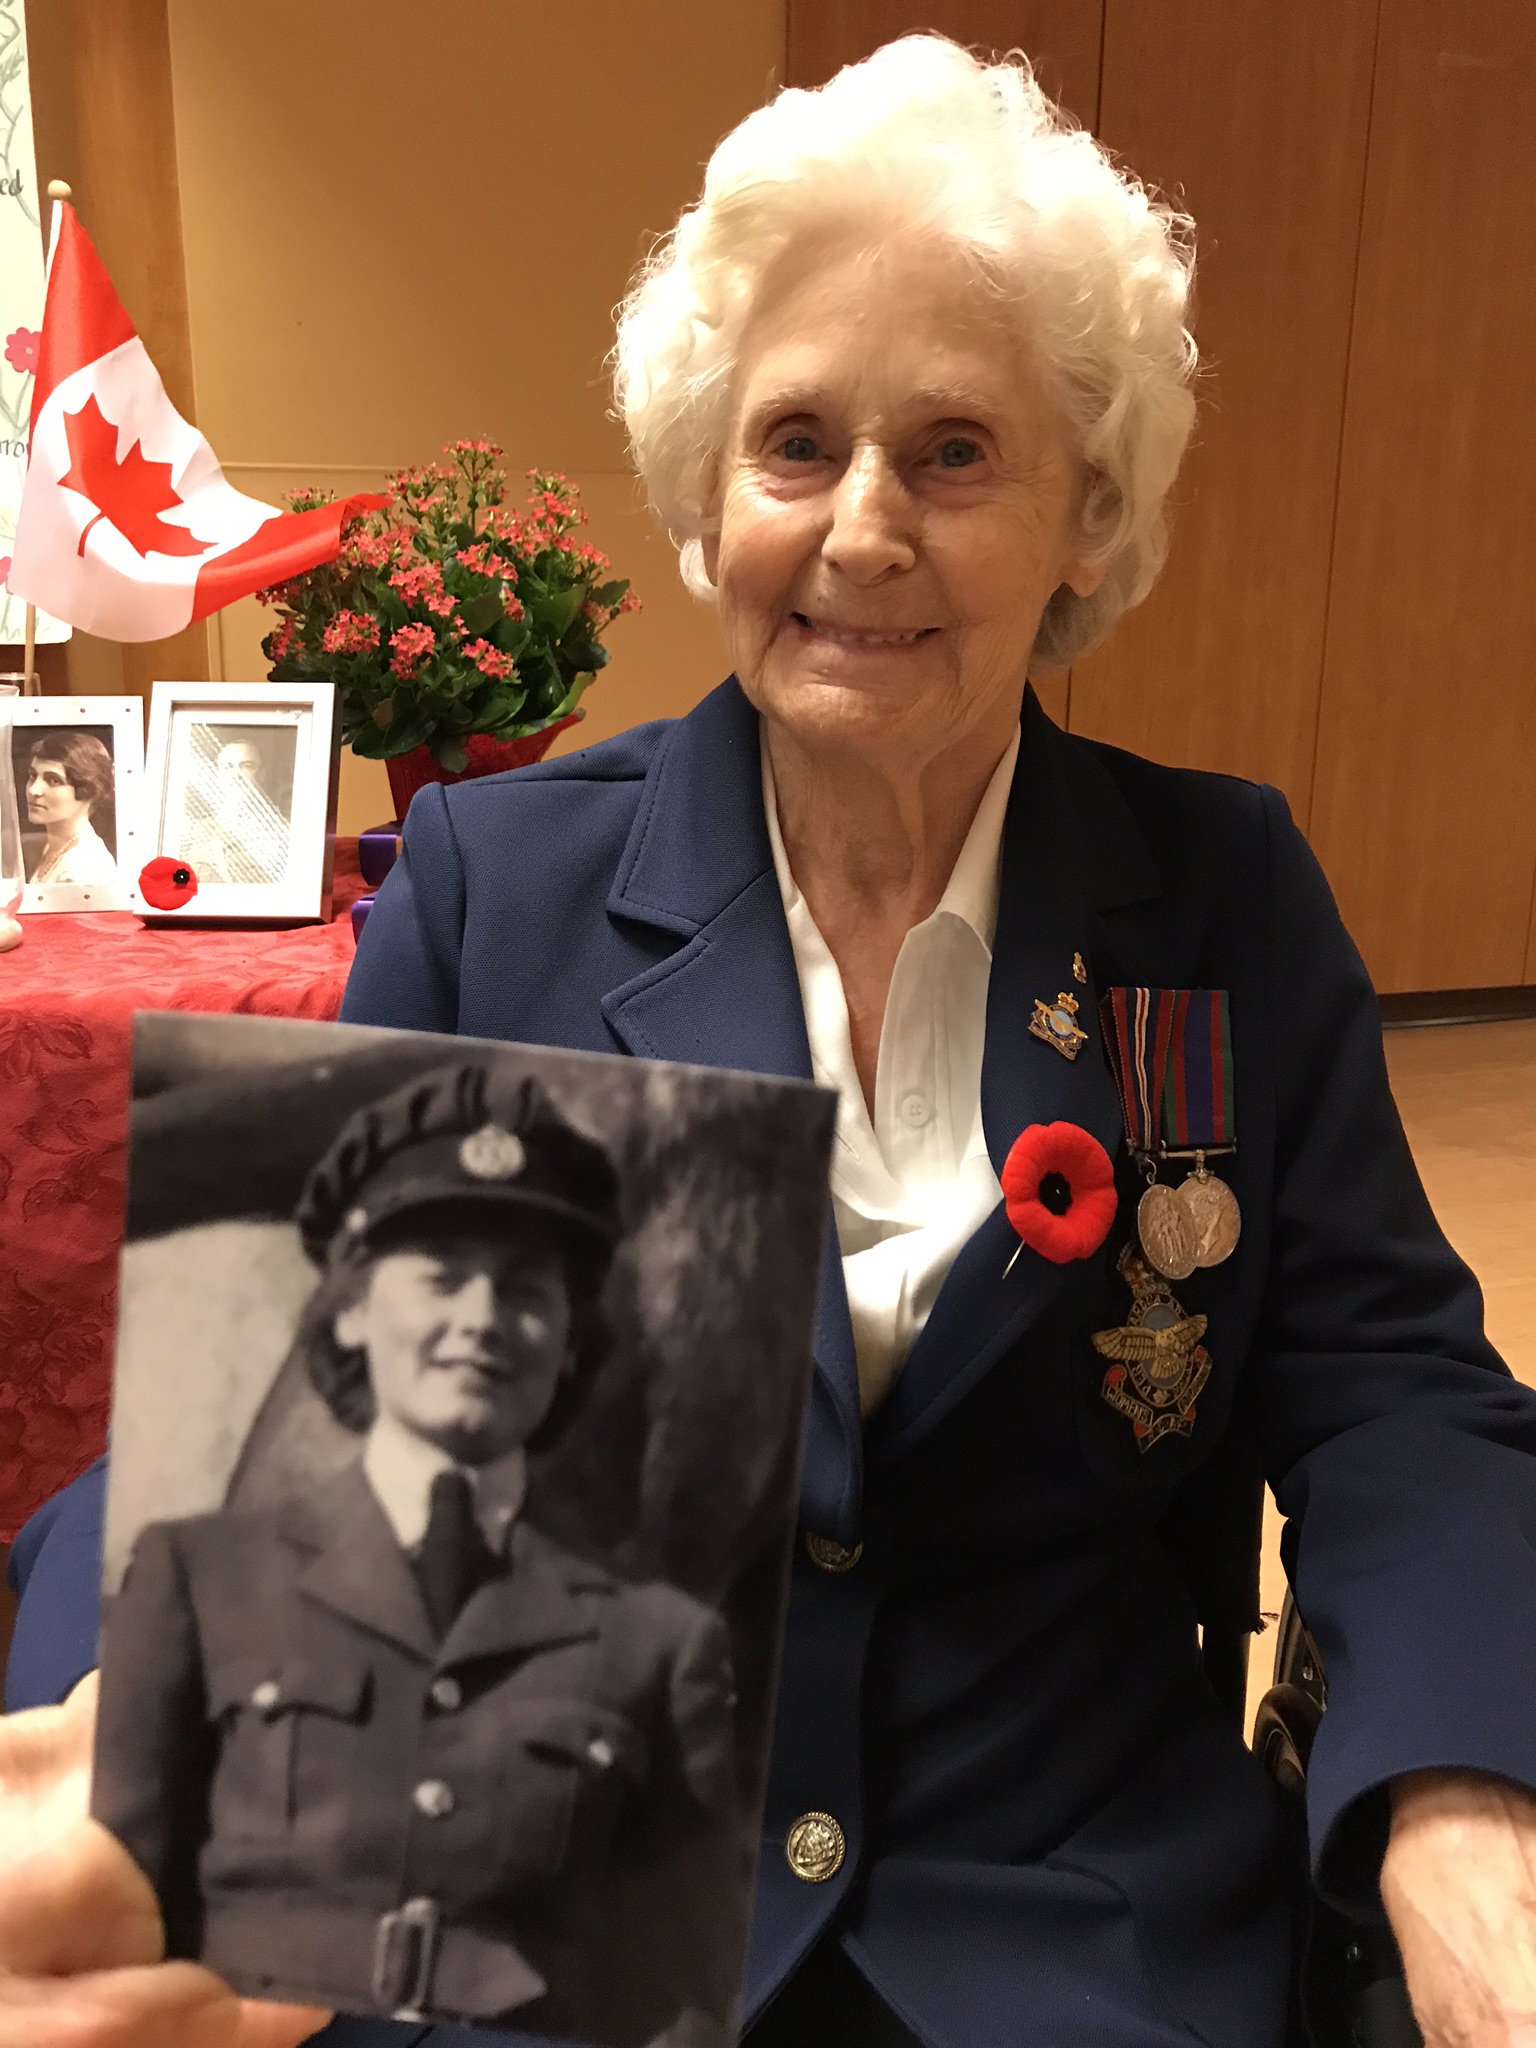 Royal Canadian Air Force veteran Geraldine Grimway holds a photo of herself from her service days.